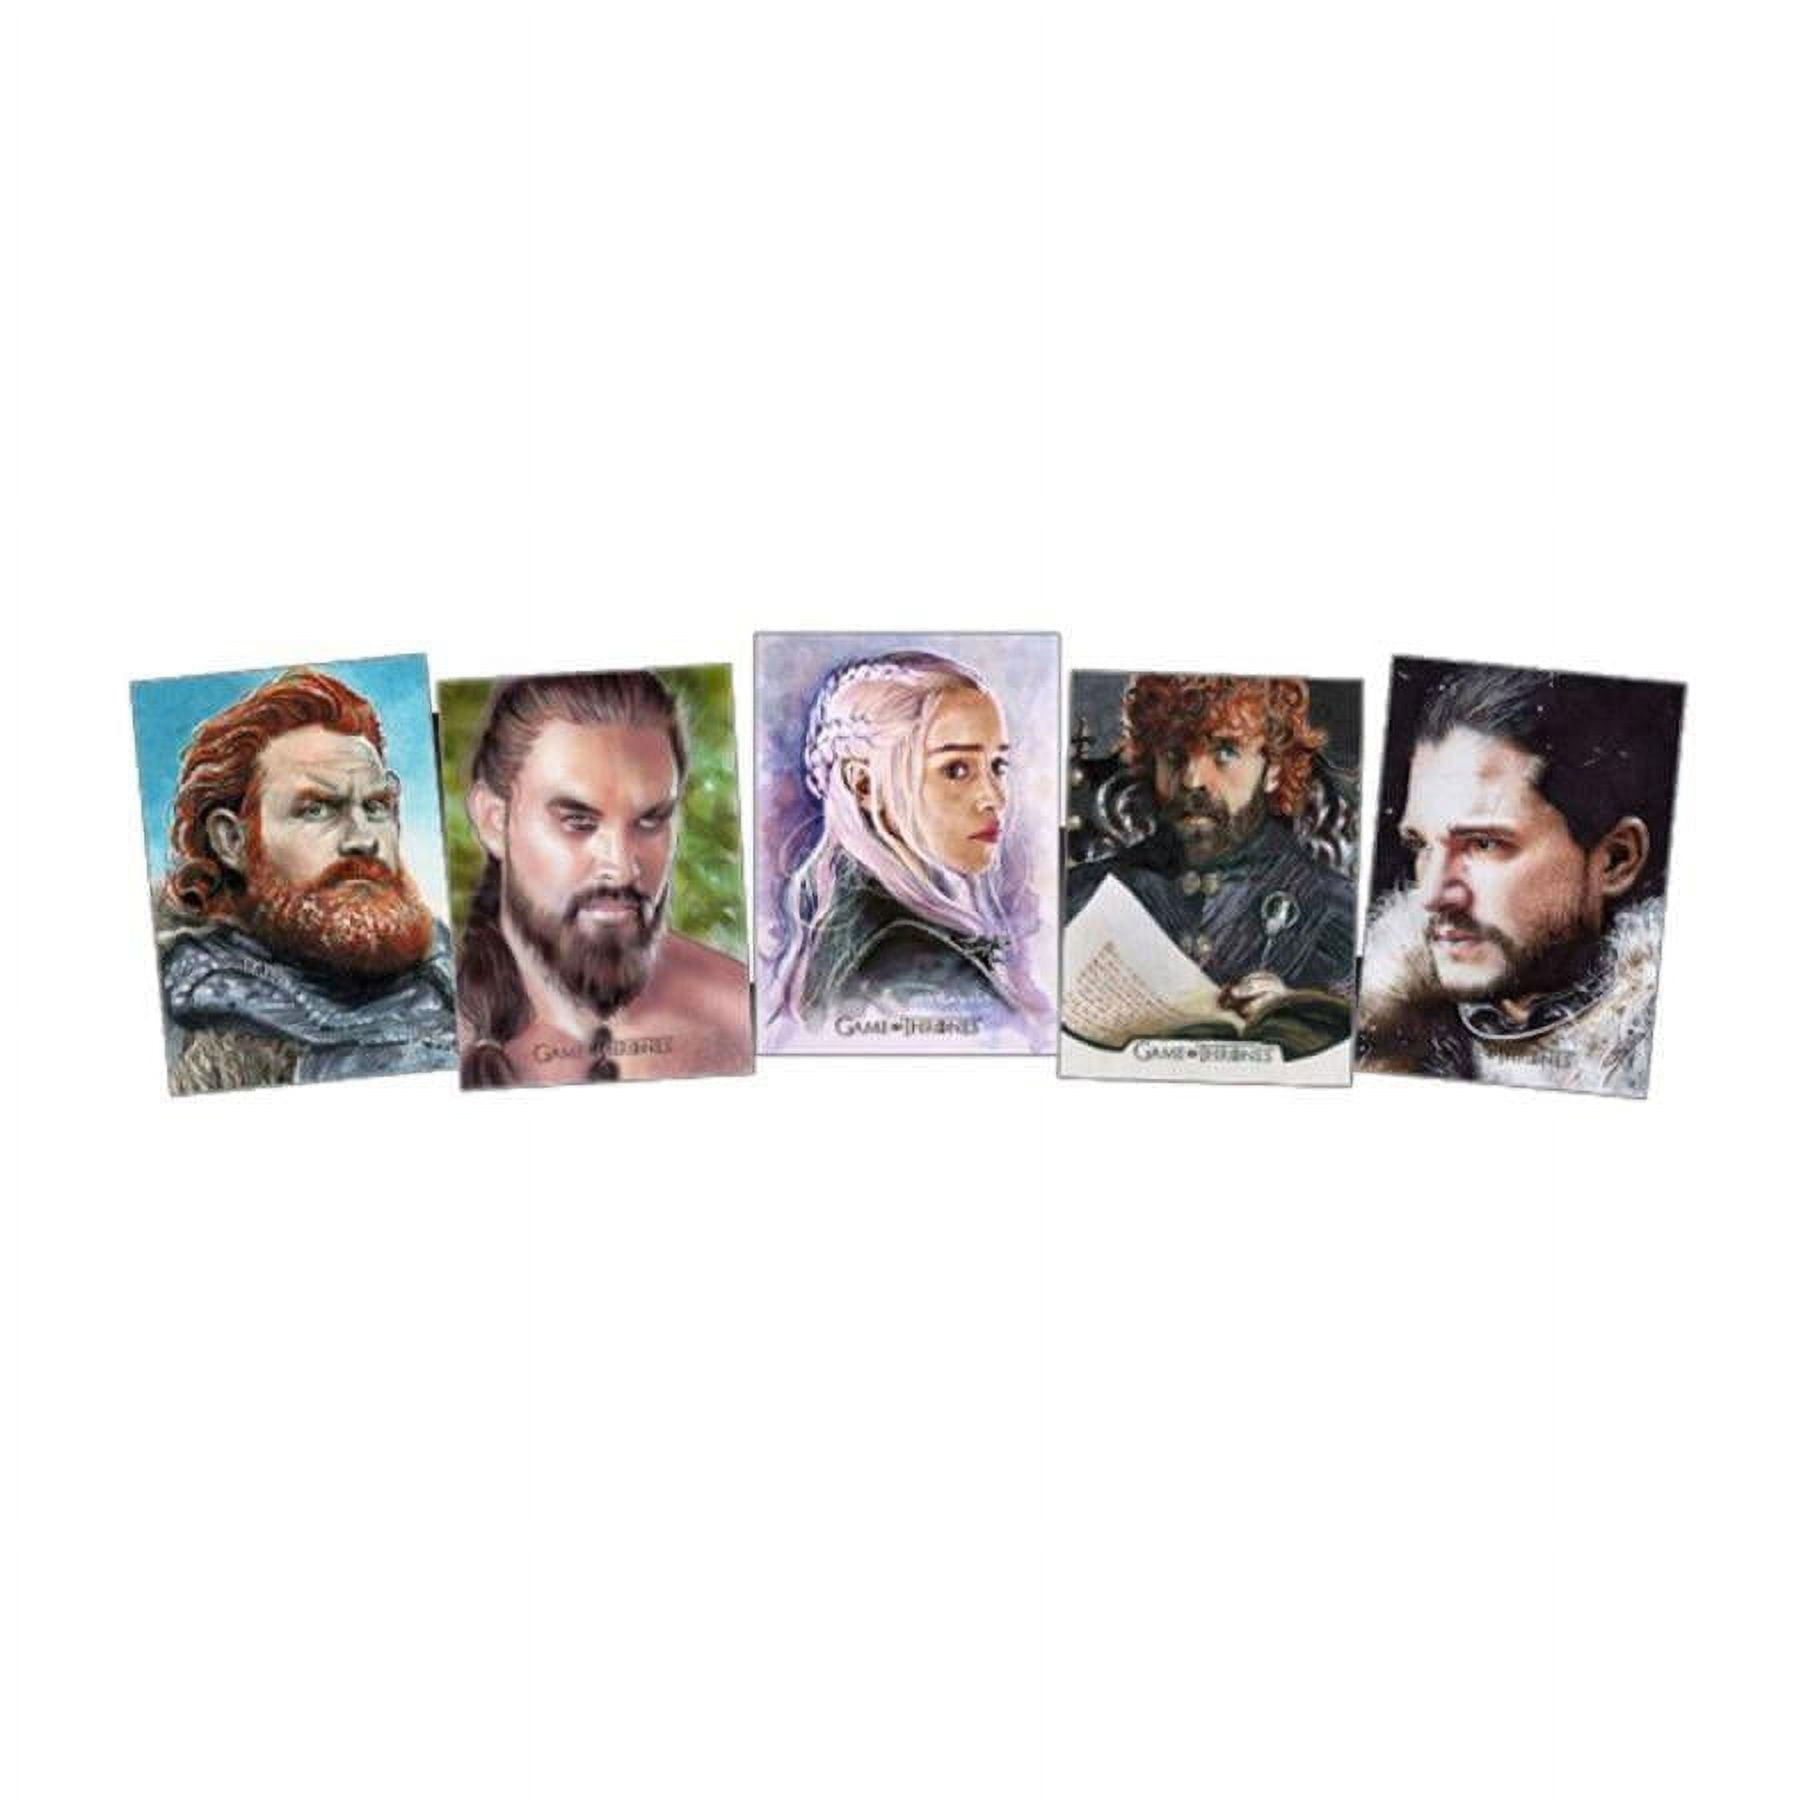 Game of Thrones: The Iron Anniversary Series 2 Trading Cards